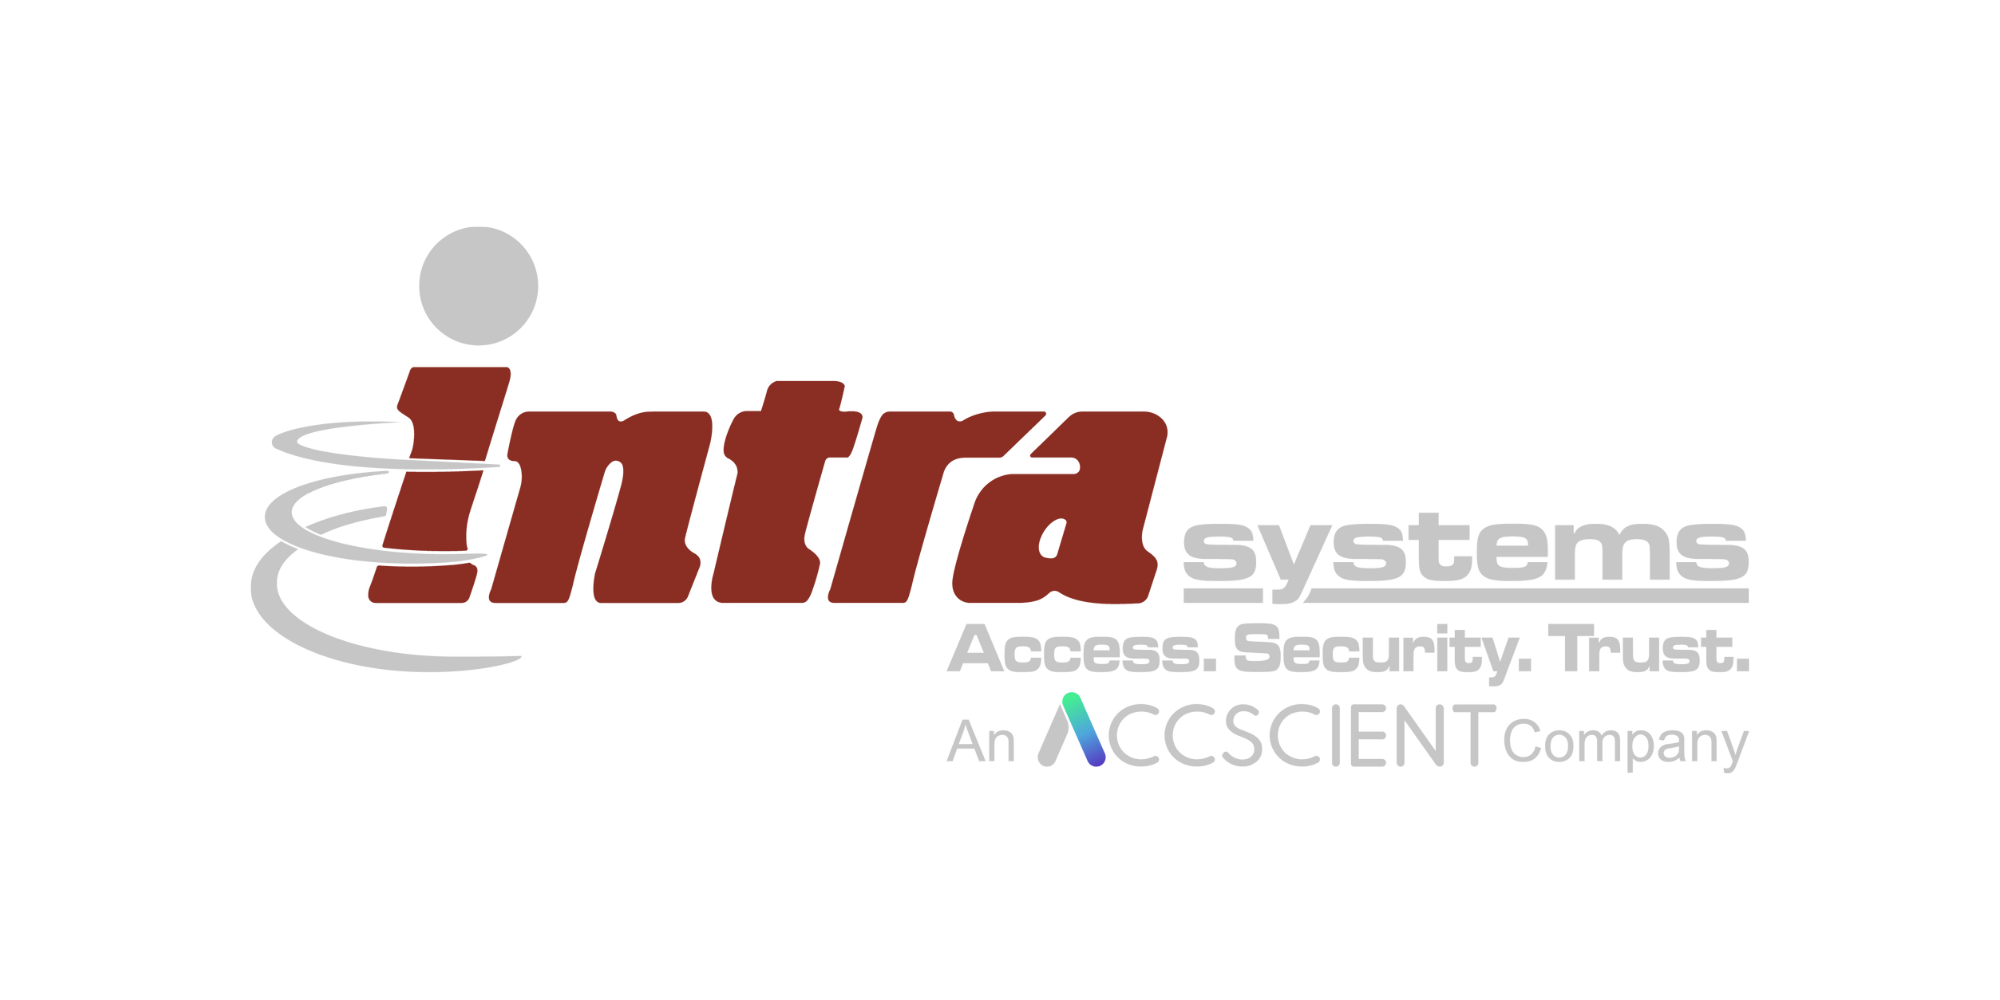 intra systems - an accscient company